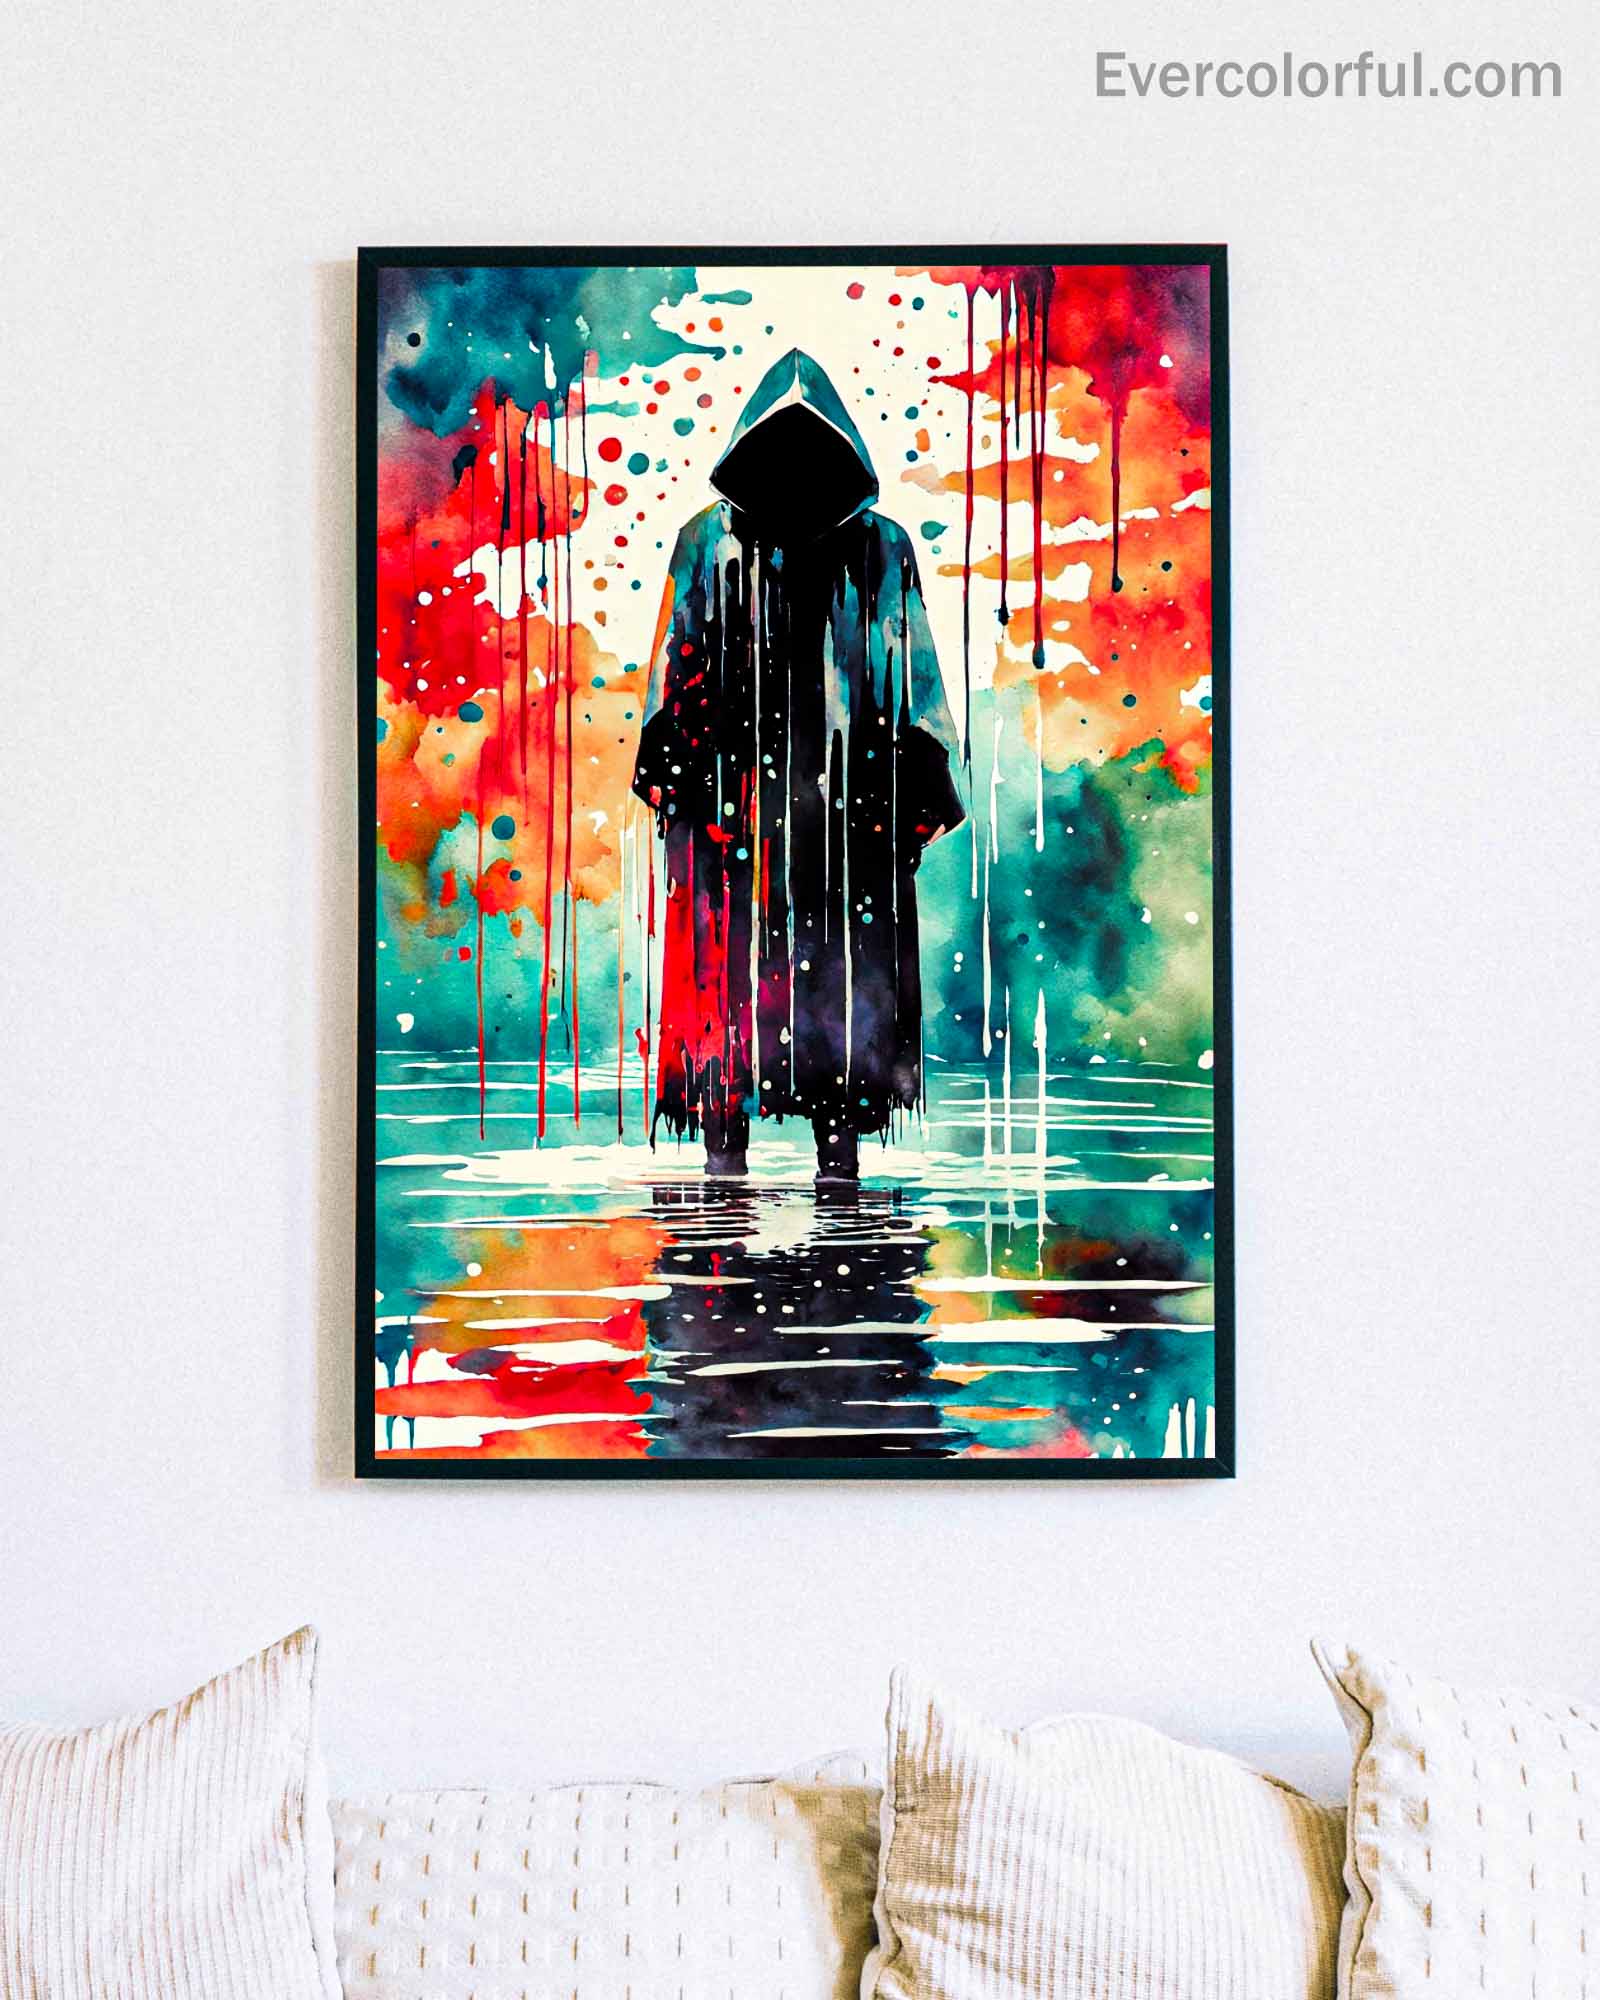 Cloaked shadow - Poster - Ever colorful